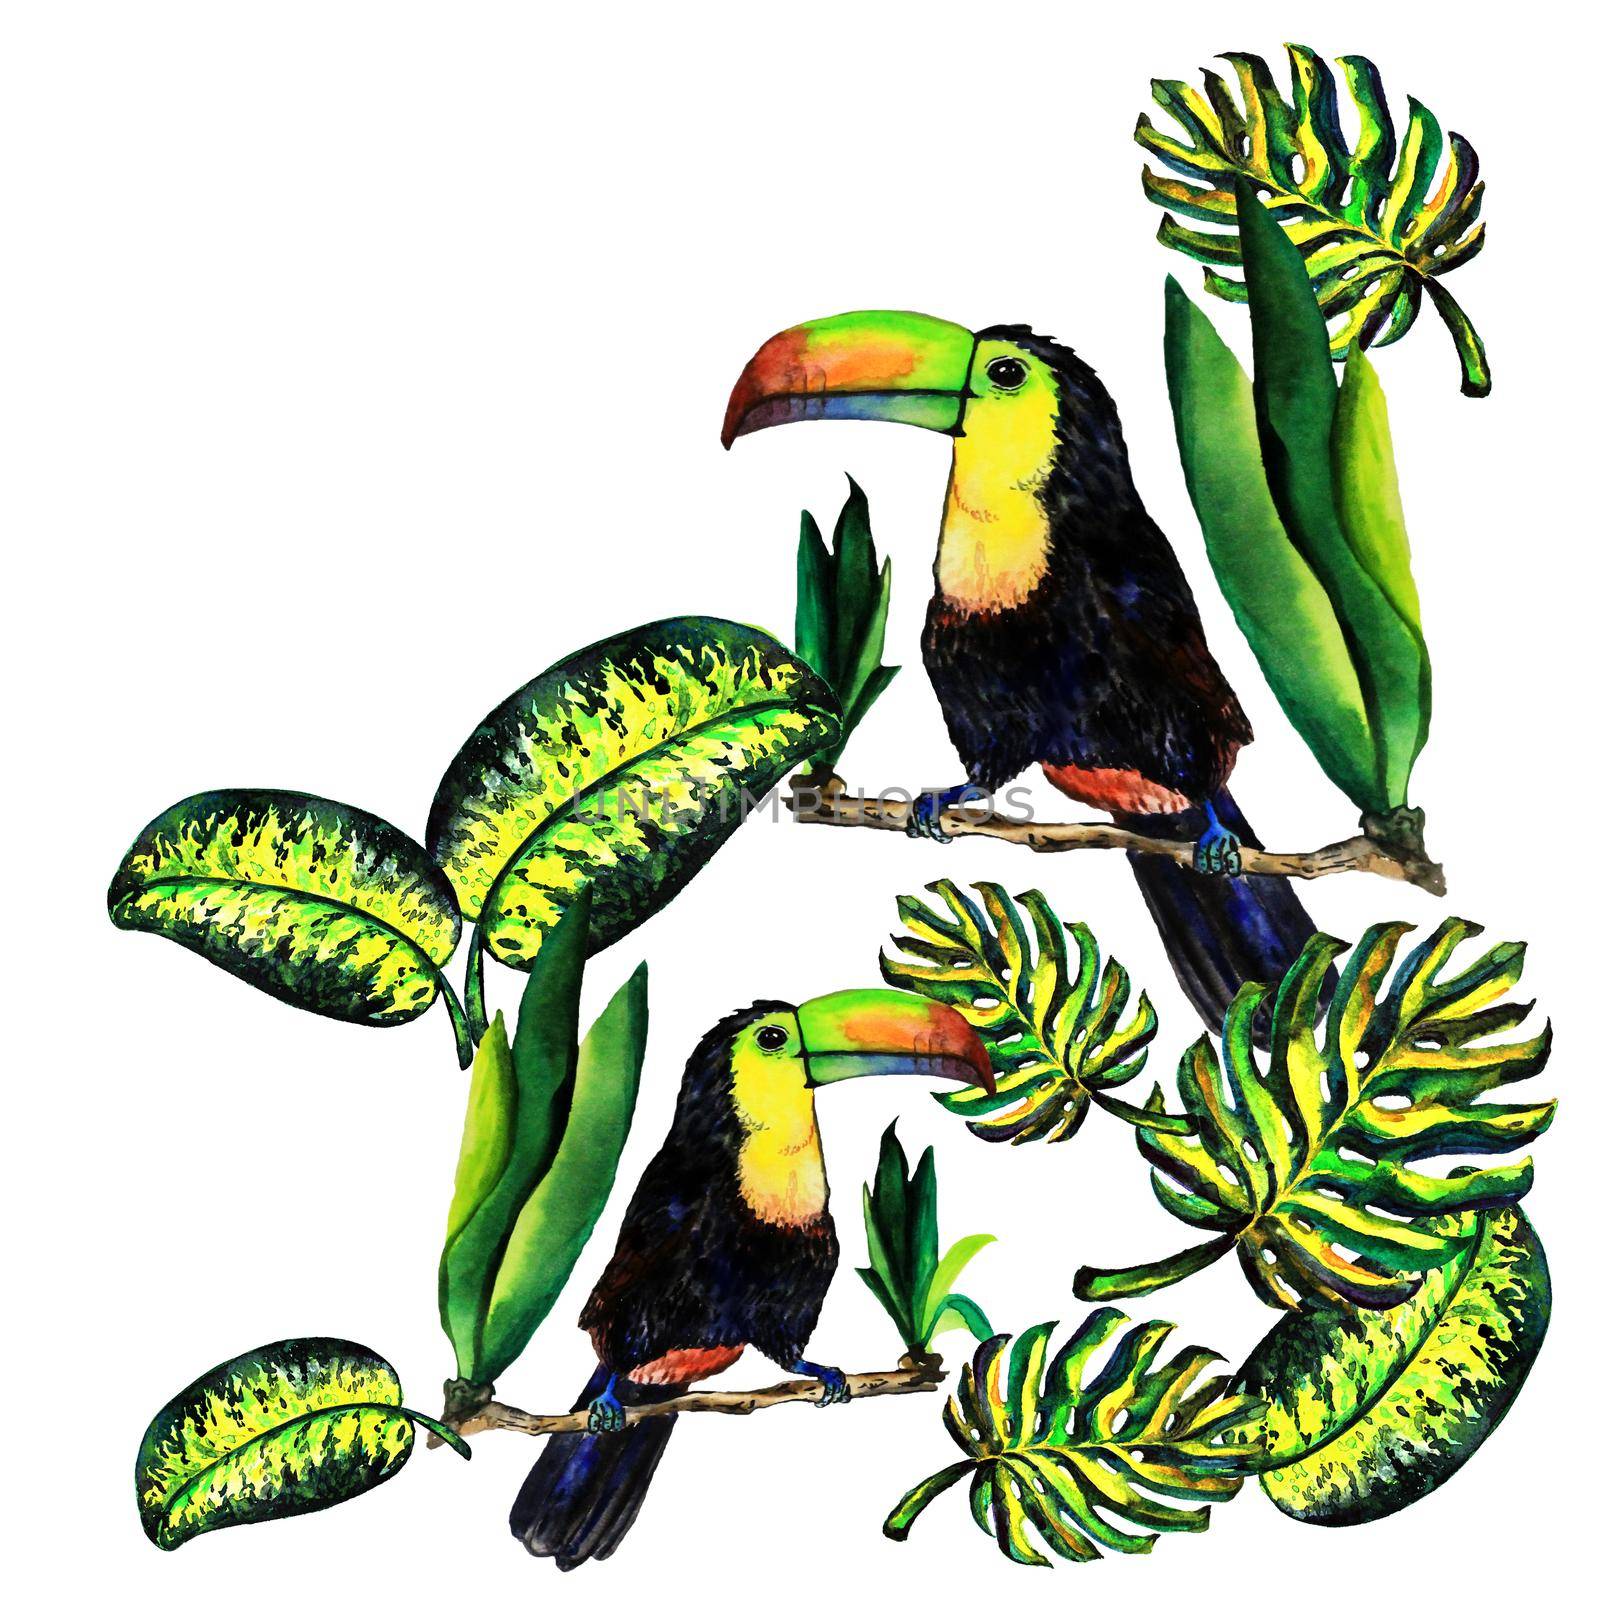 Greeting card of leaves monstera and Toucan by DesignAB